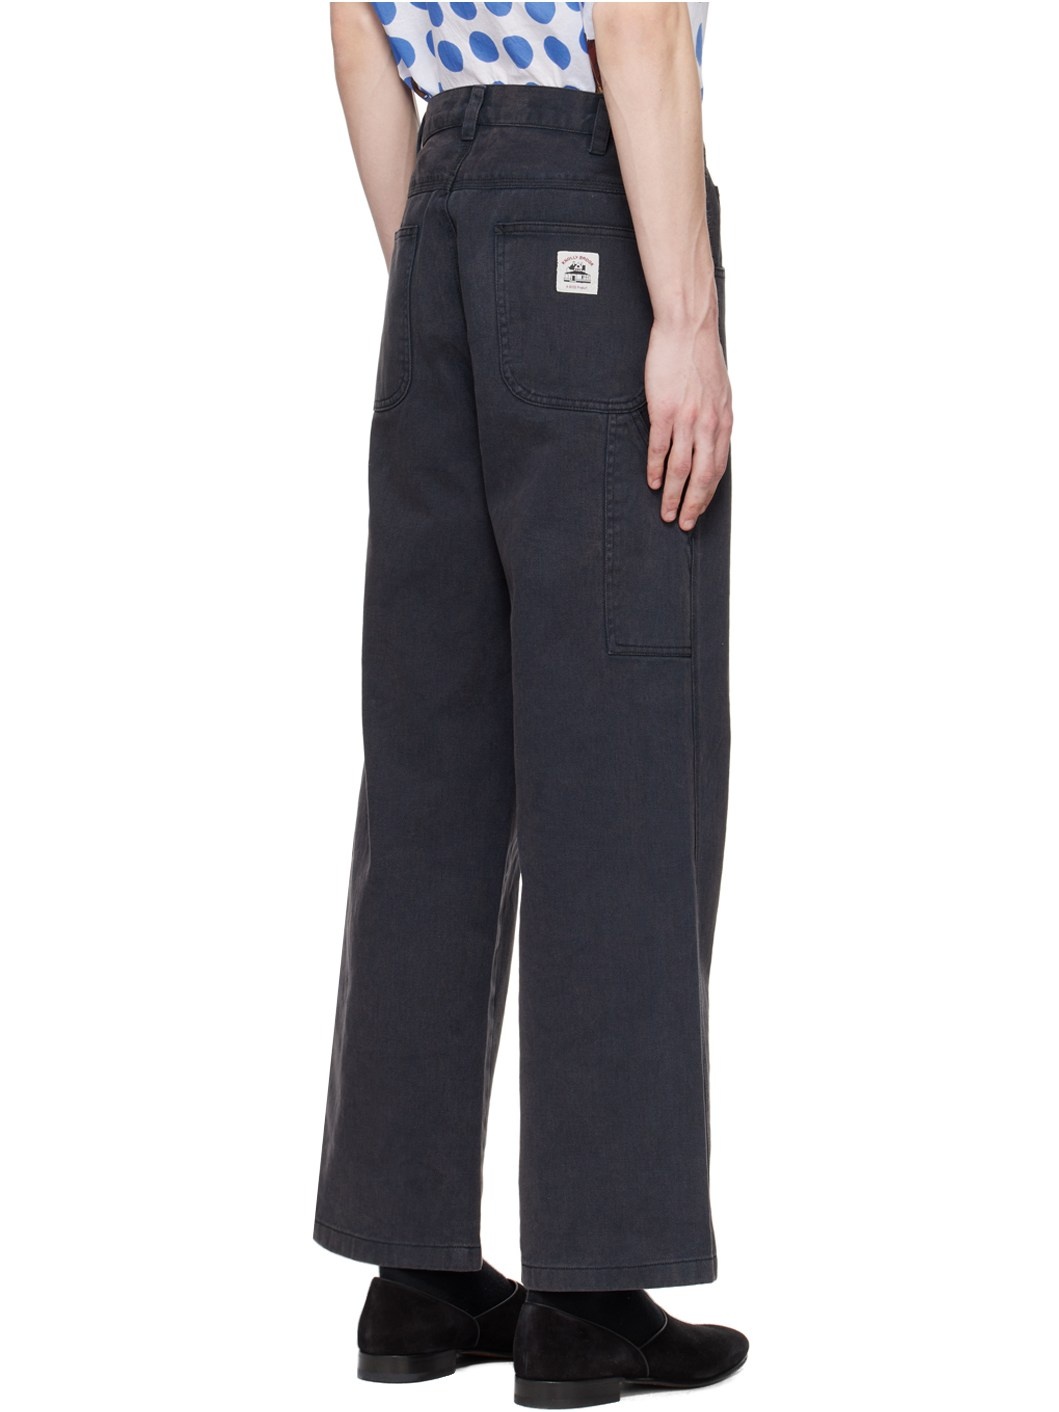 Black Knolly Brook Trousers - 3